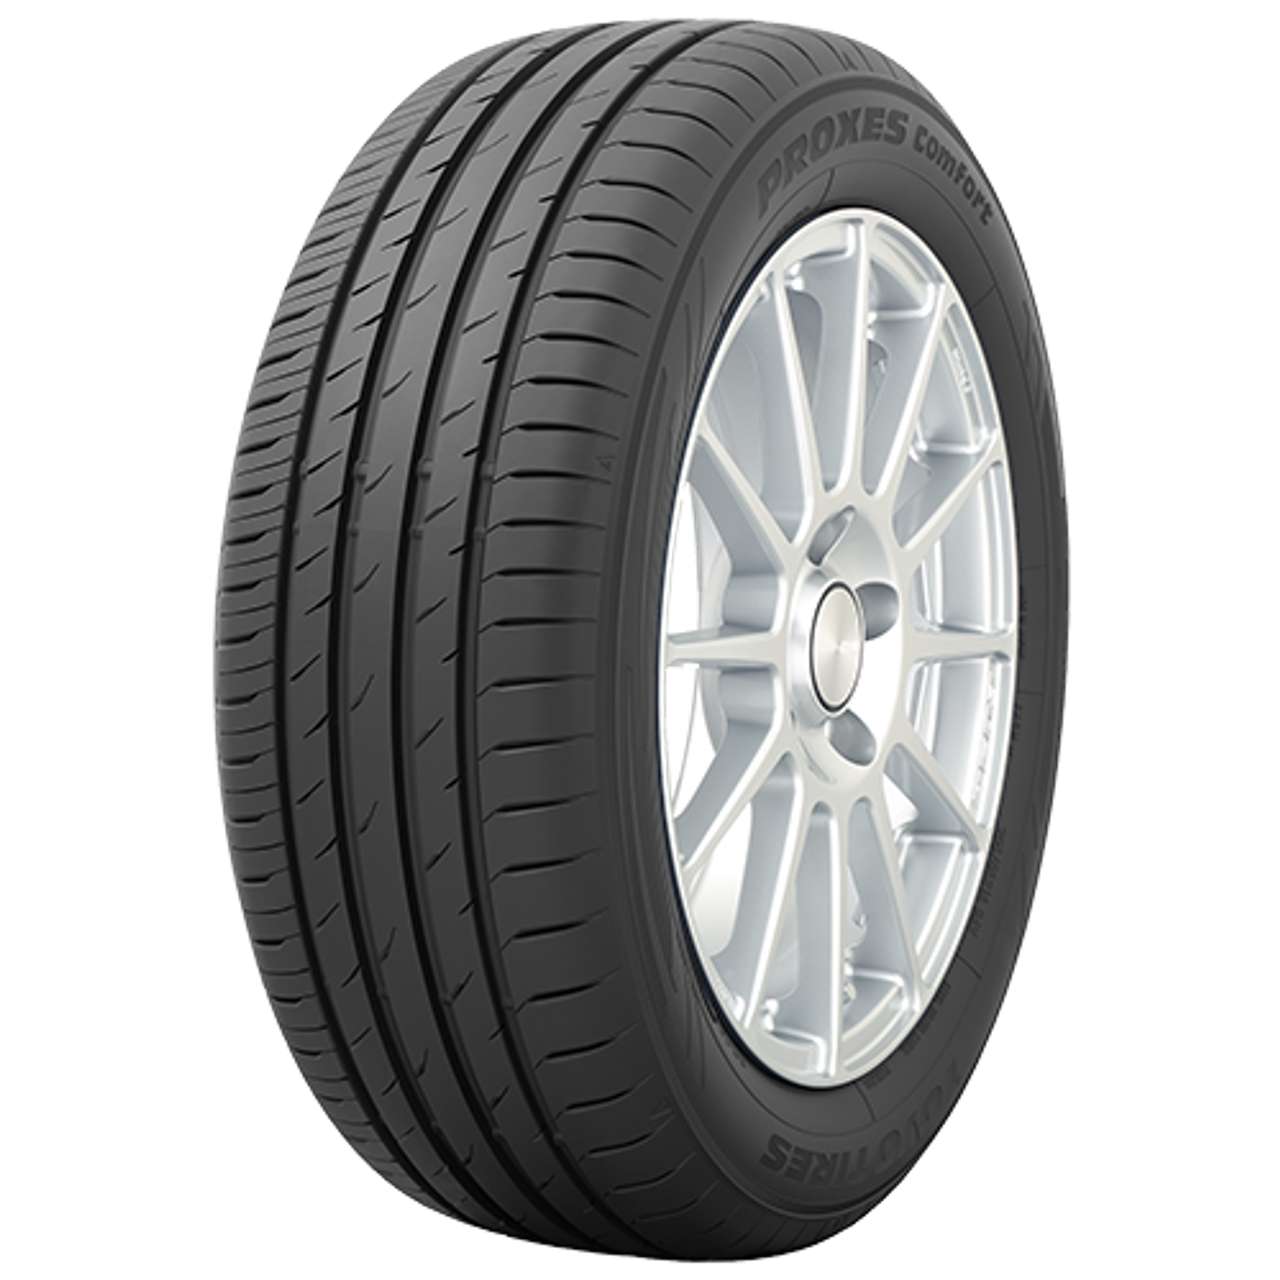 TOYO PROXES COMFORT 215/50R17 95V MFS BSW